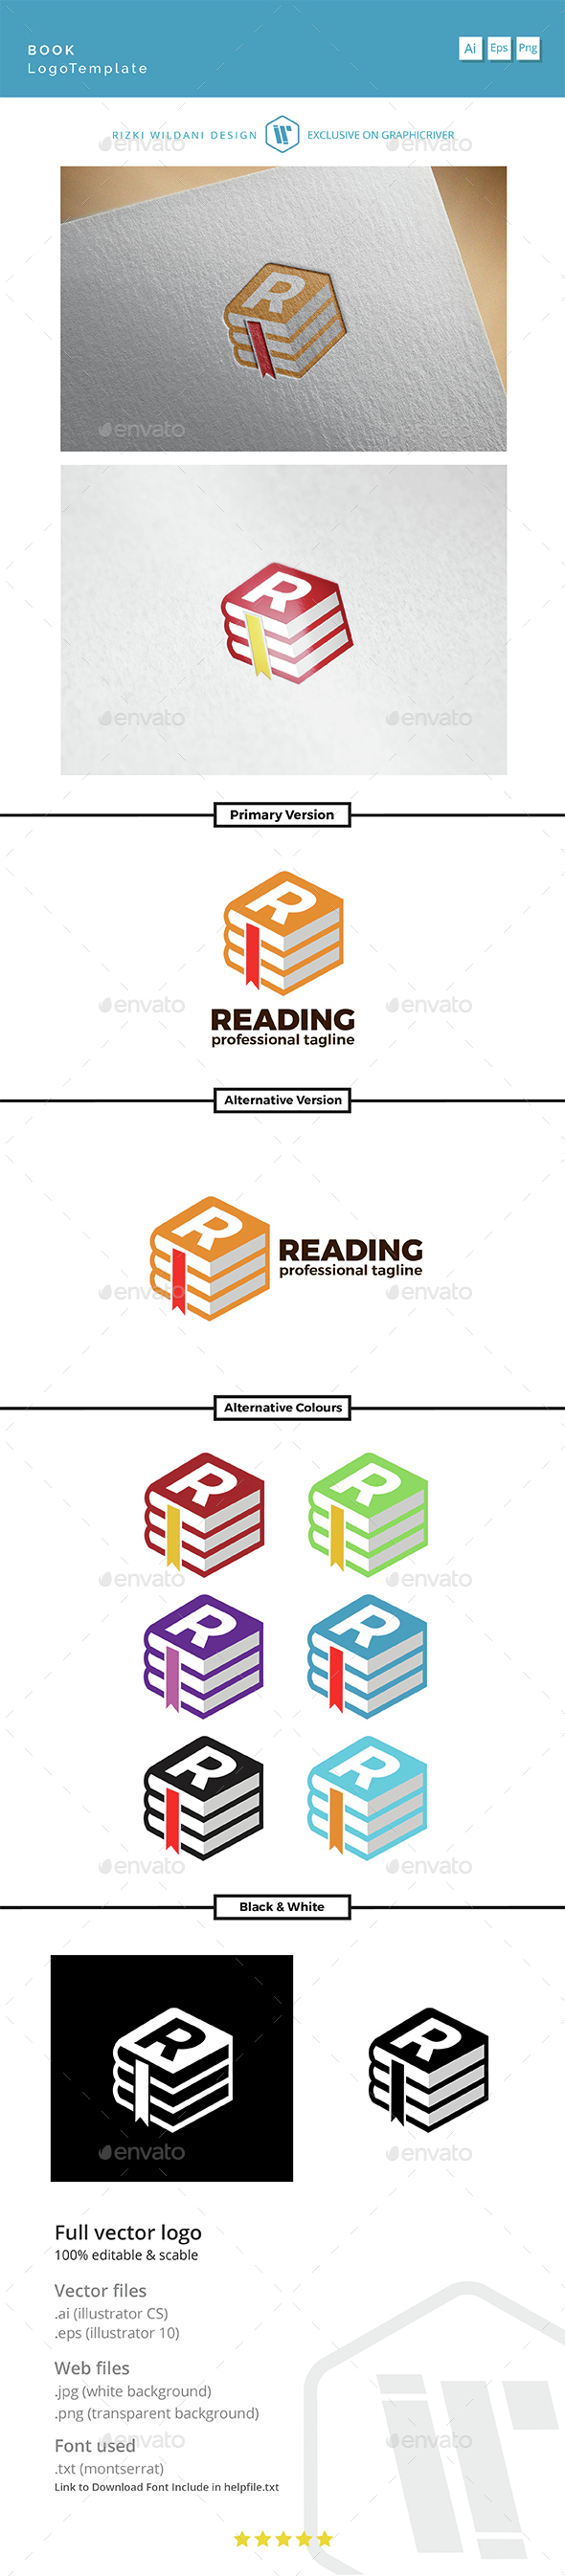 Reading Book Logo And Symbols Silhouette Illustration Royalty Free SVG,  Cliparts, Vectors, and Stock Illustration. Image 97344623.